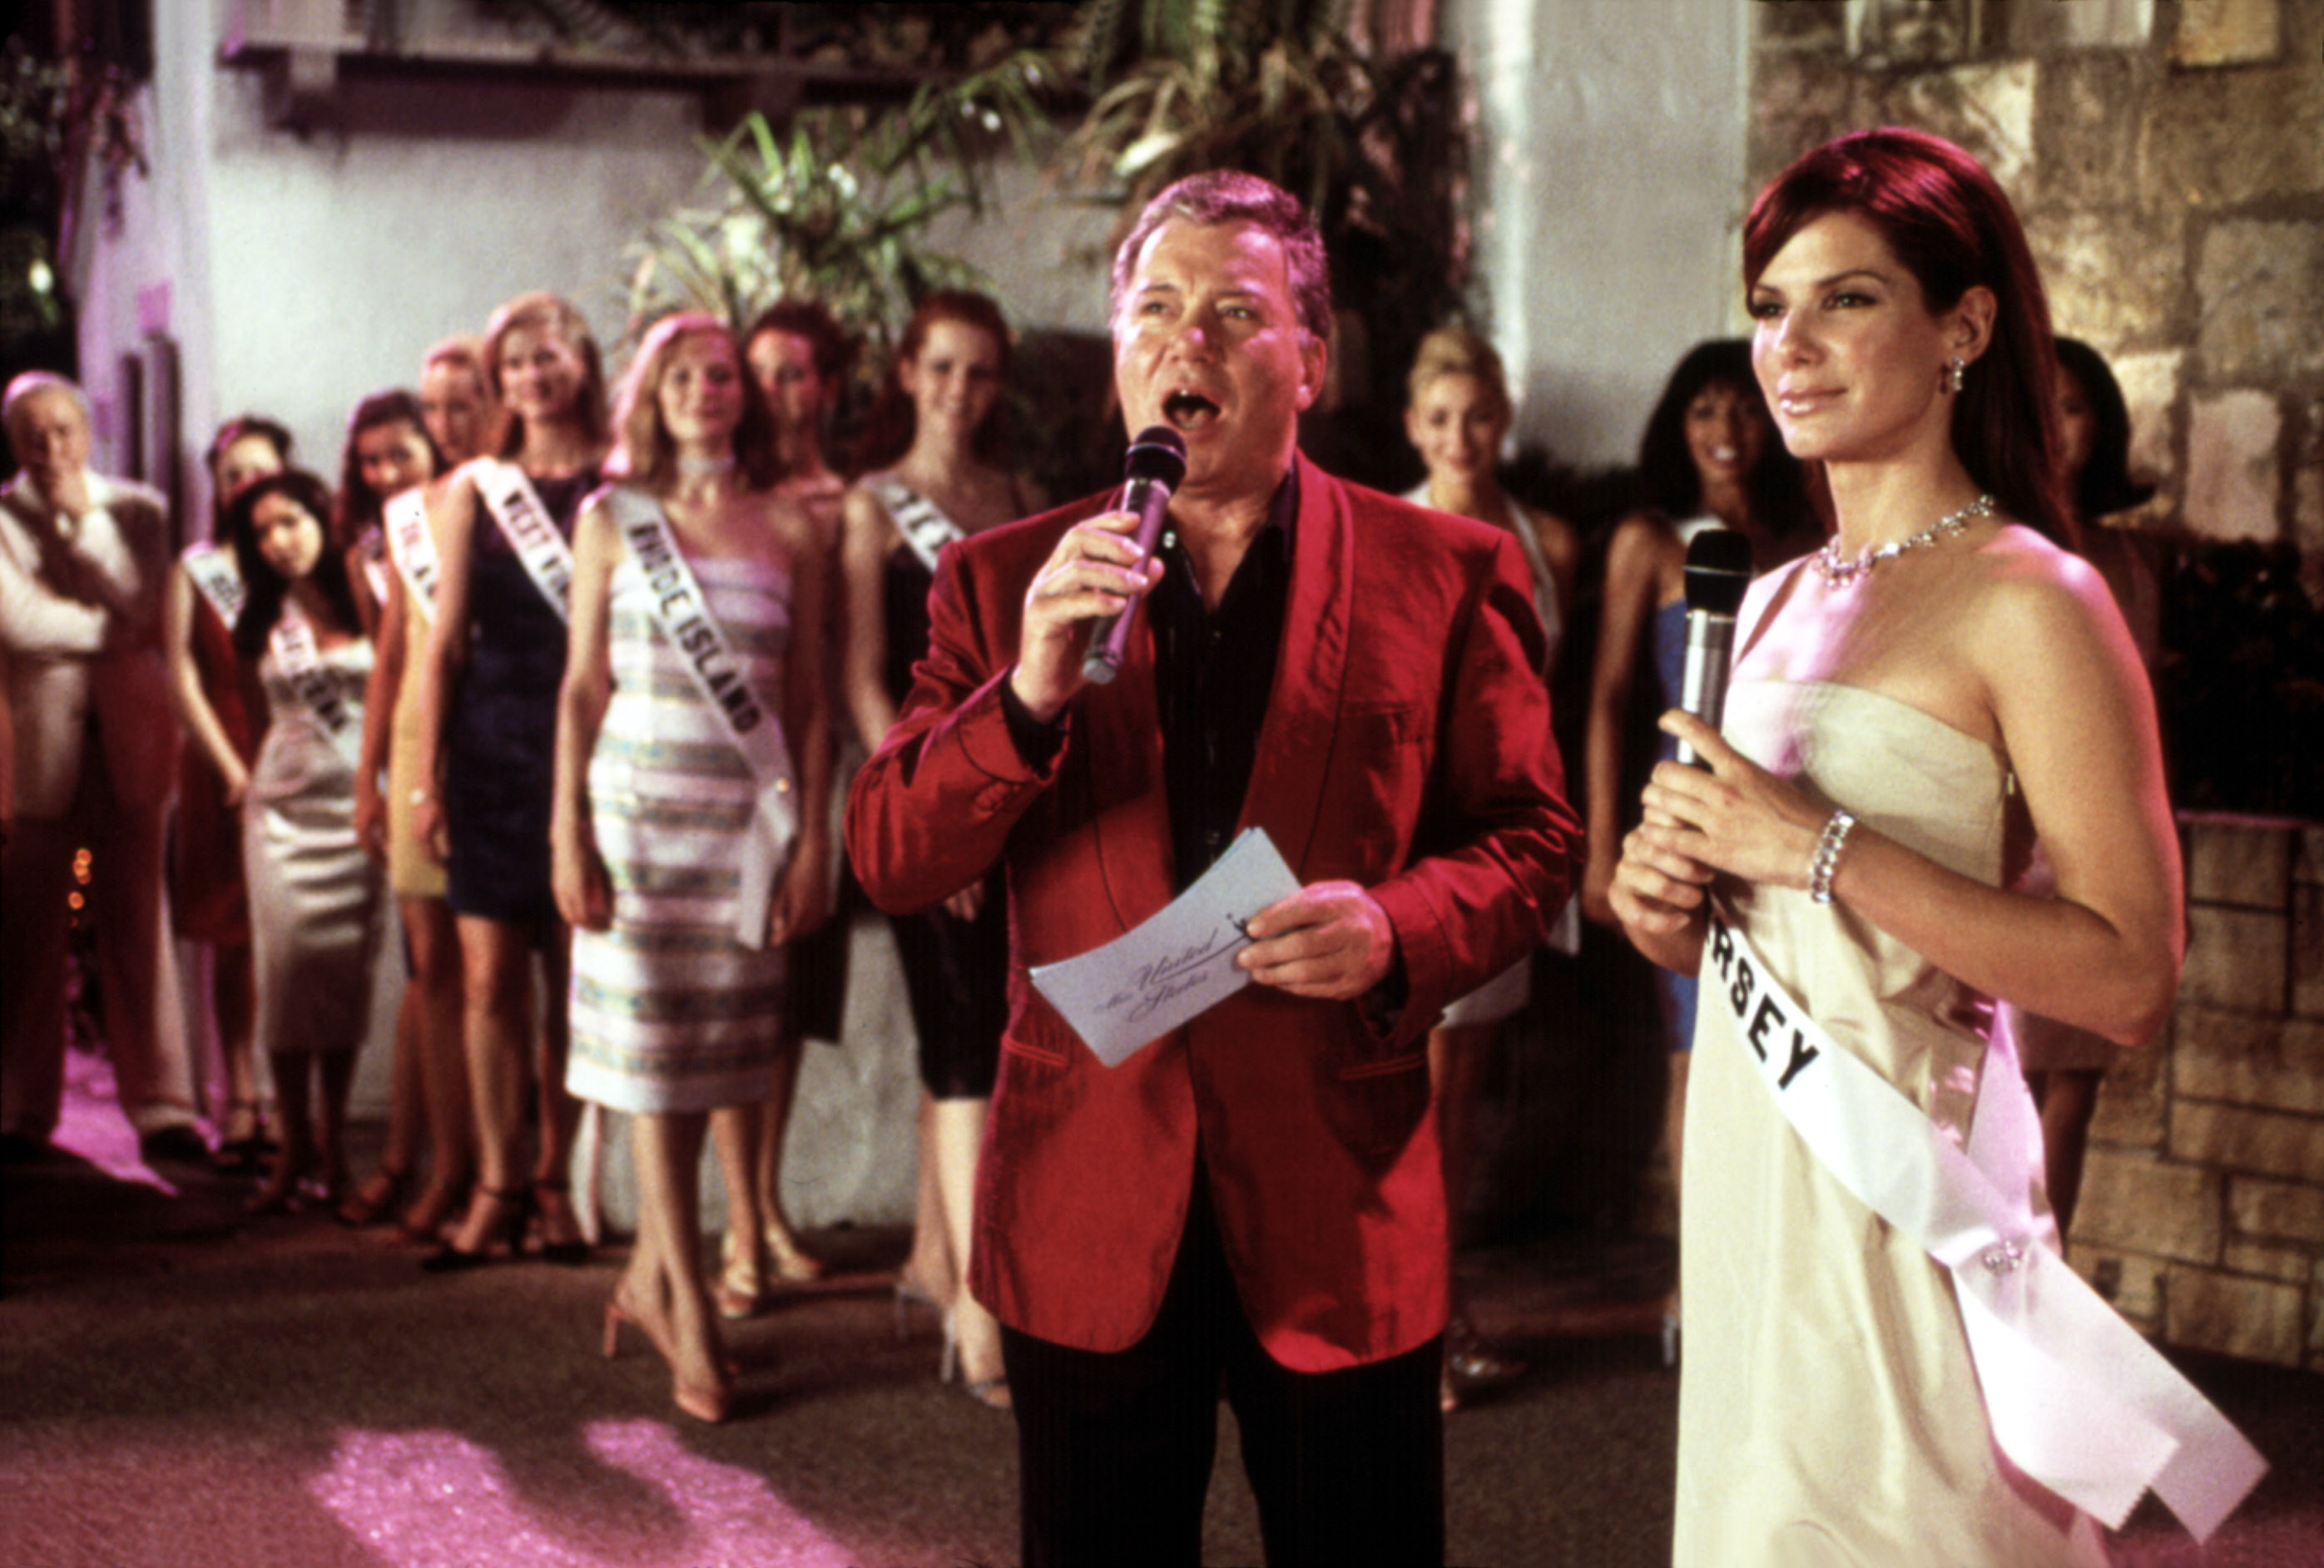 William Shatner interviewing Sandra Bullock in a pageant